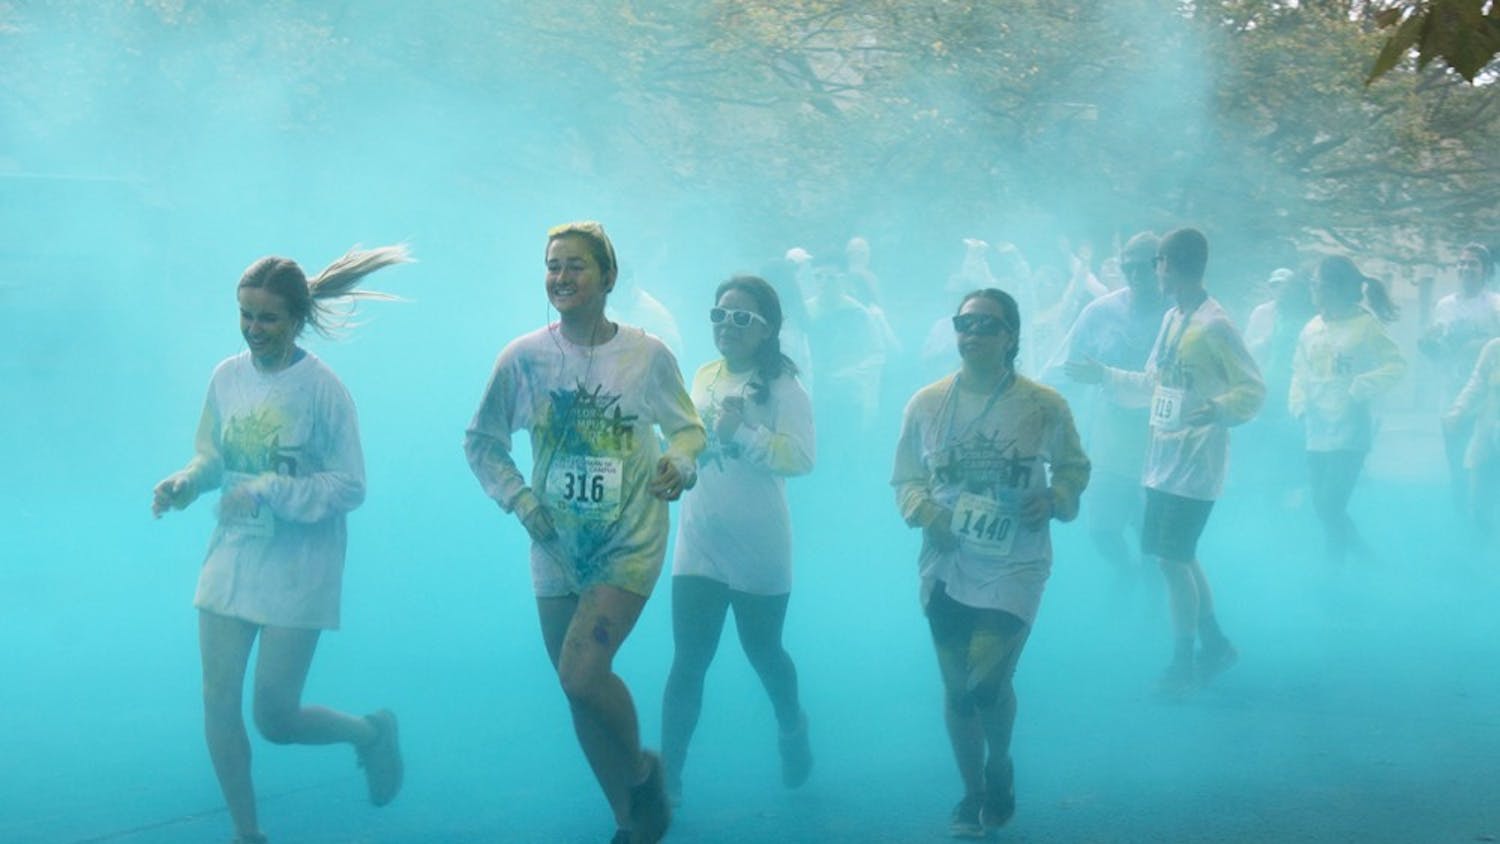 Participants run through blue powder at the last color station of the Jill Behrman Color the Campus 5K Run/Walk on Saturday. This was the 18th running of the JB5K.